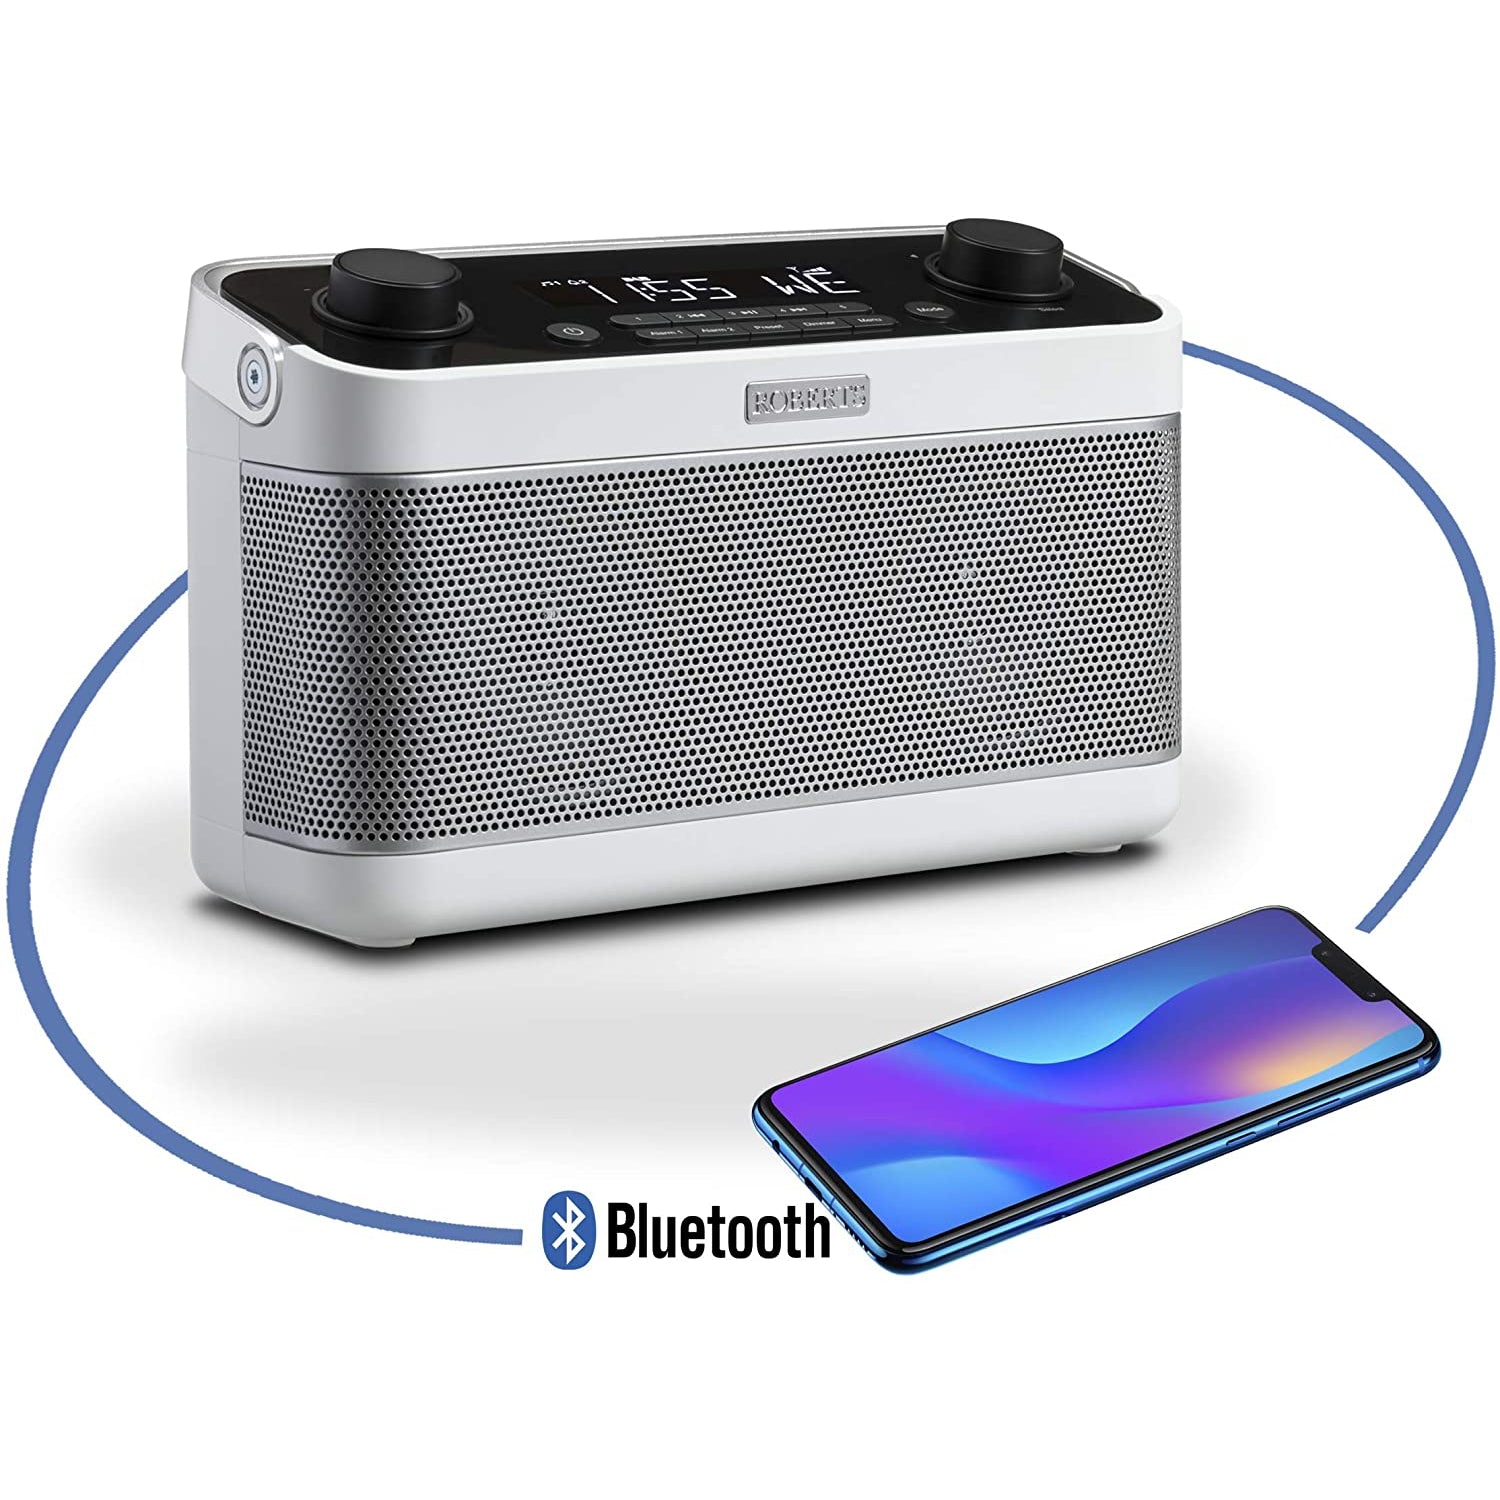 Roberts Blutune 5 DAB+/DAB/FM Radio with Bluetooth and Alarm Function - White